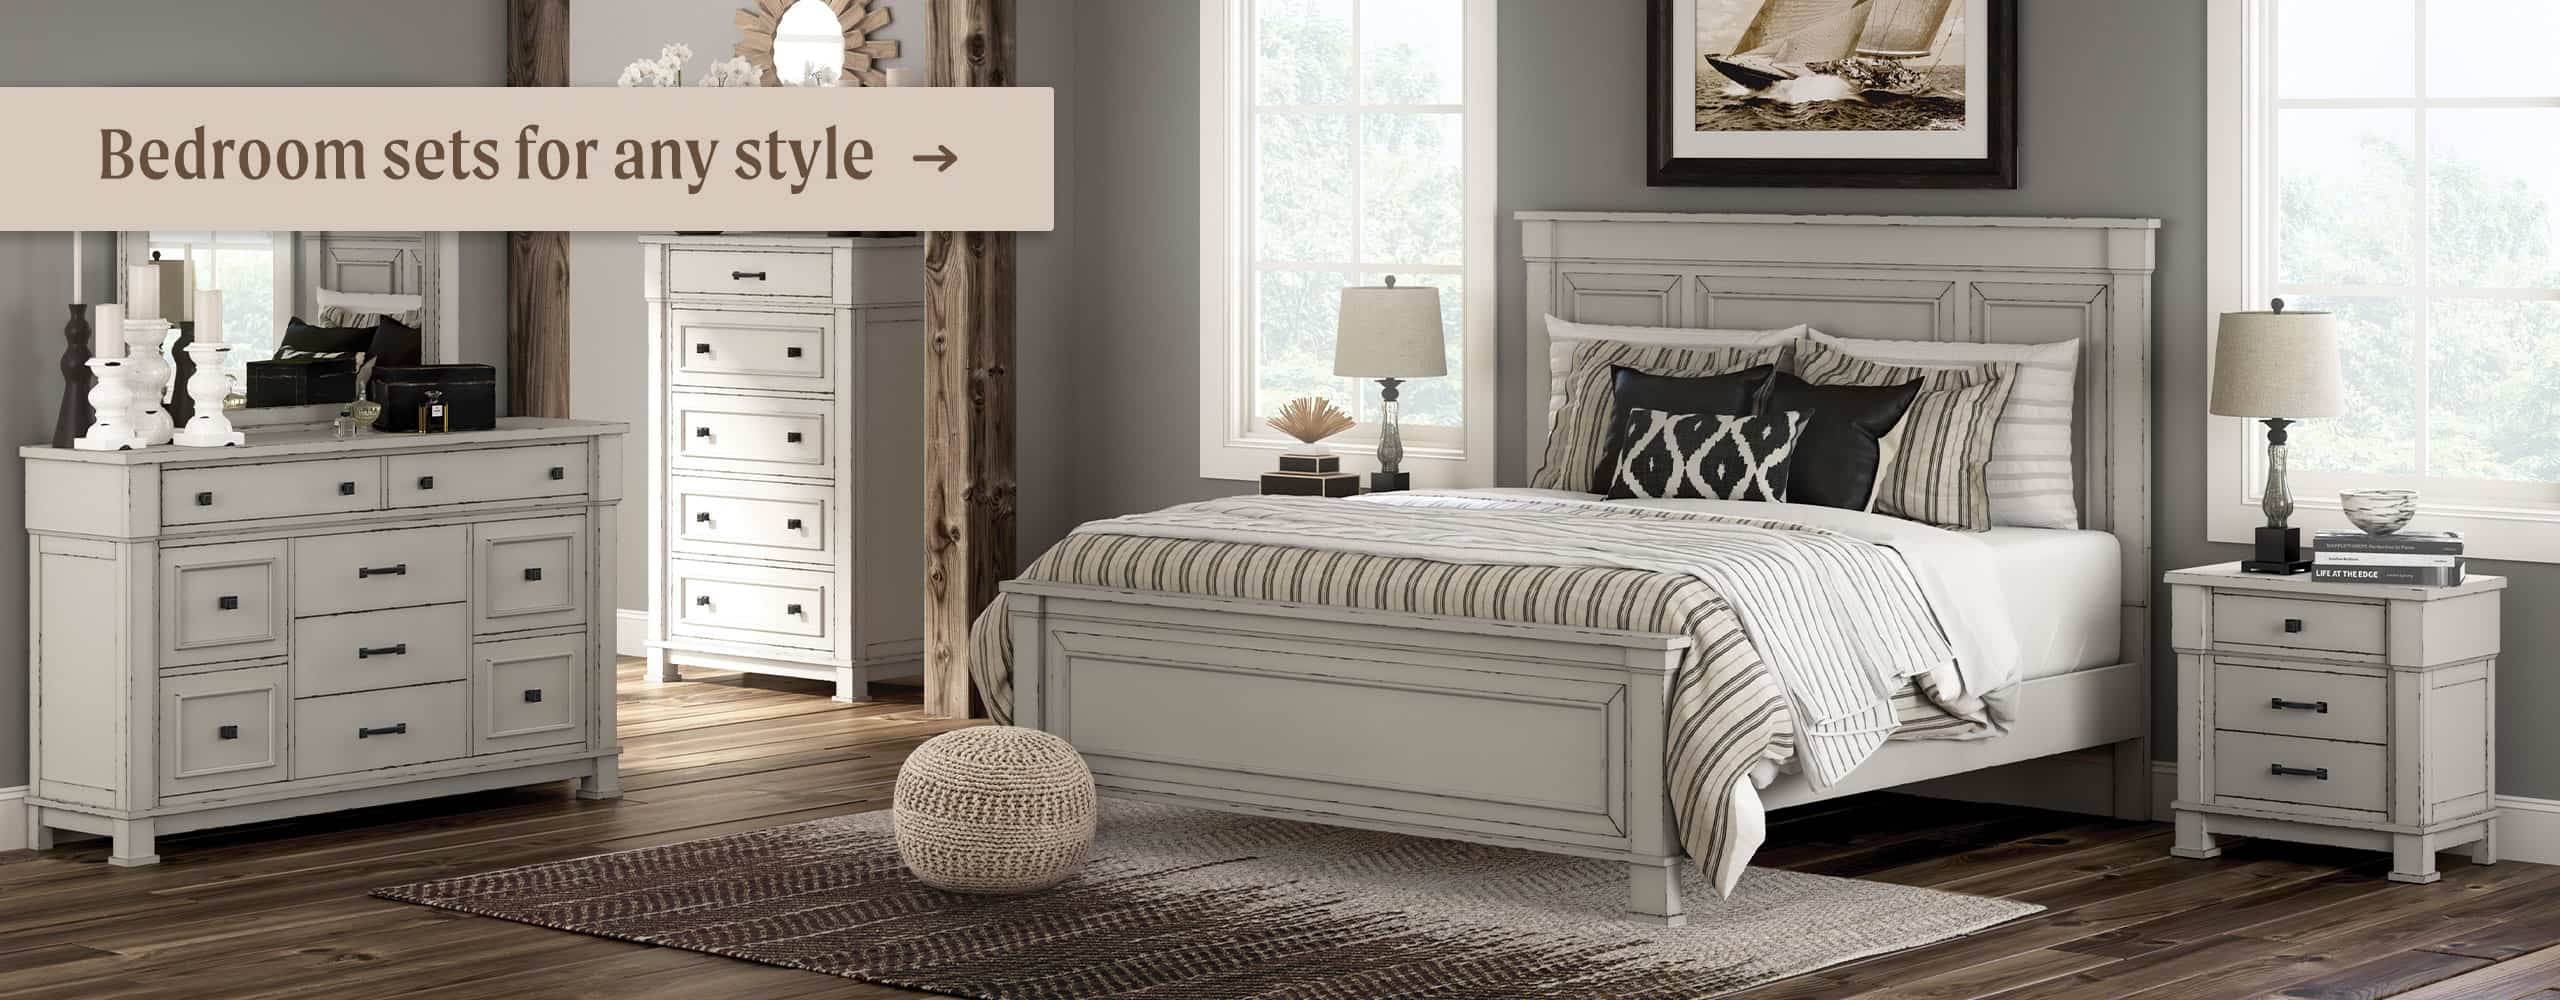 Bedroom sets for any style >